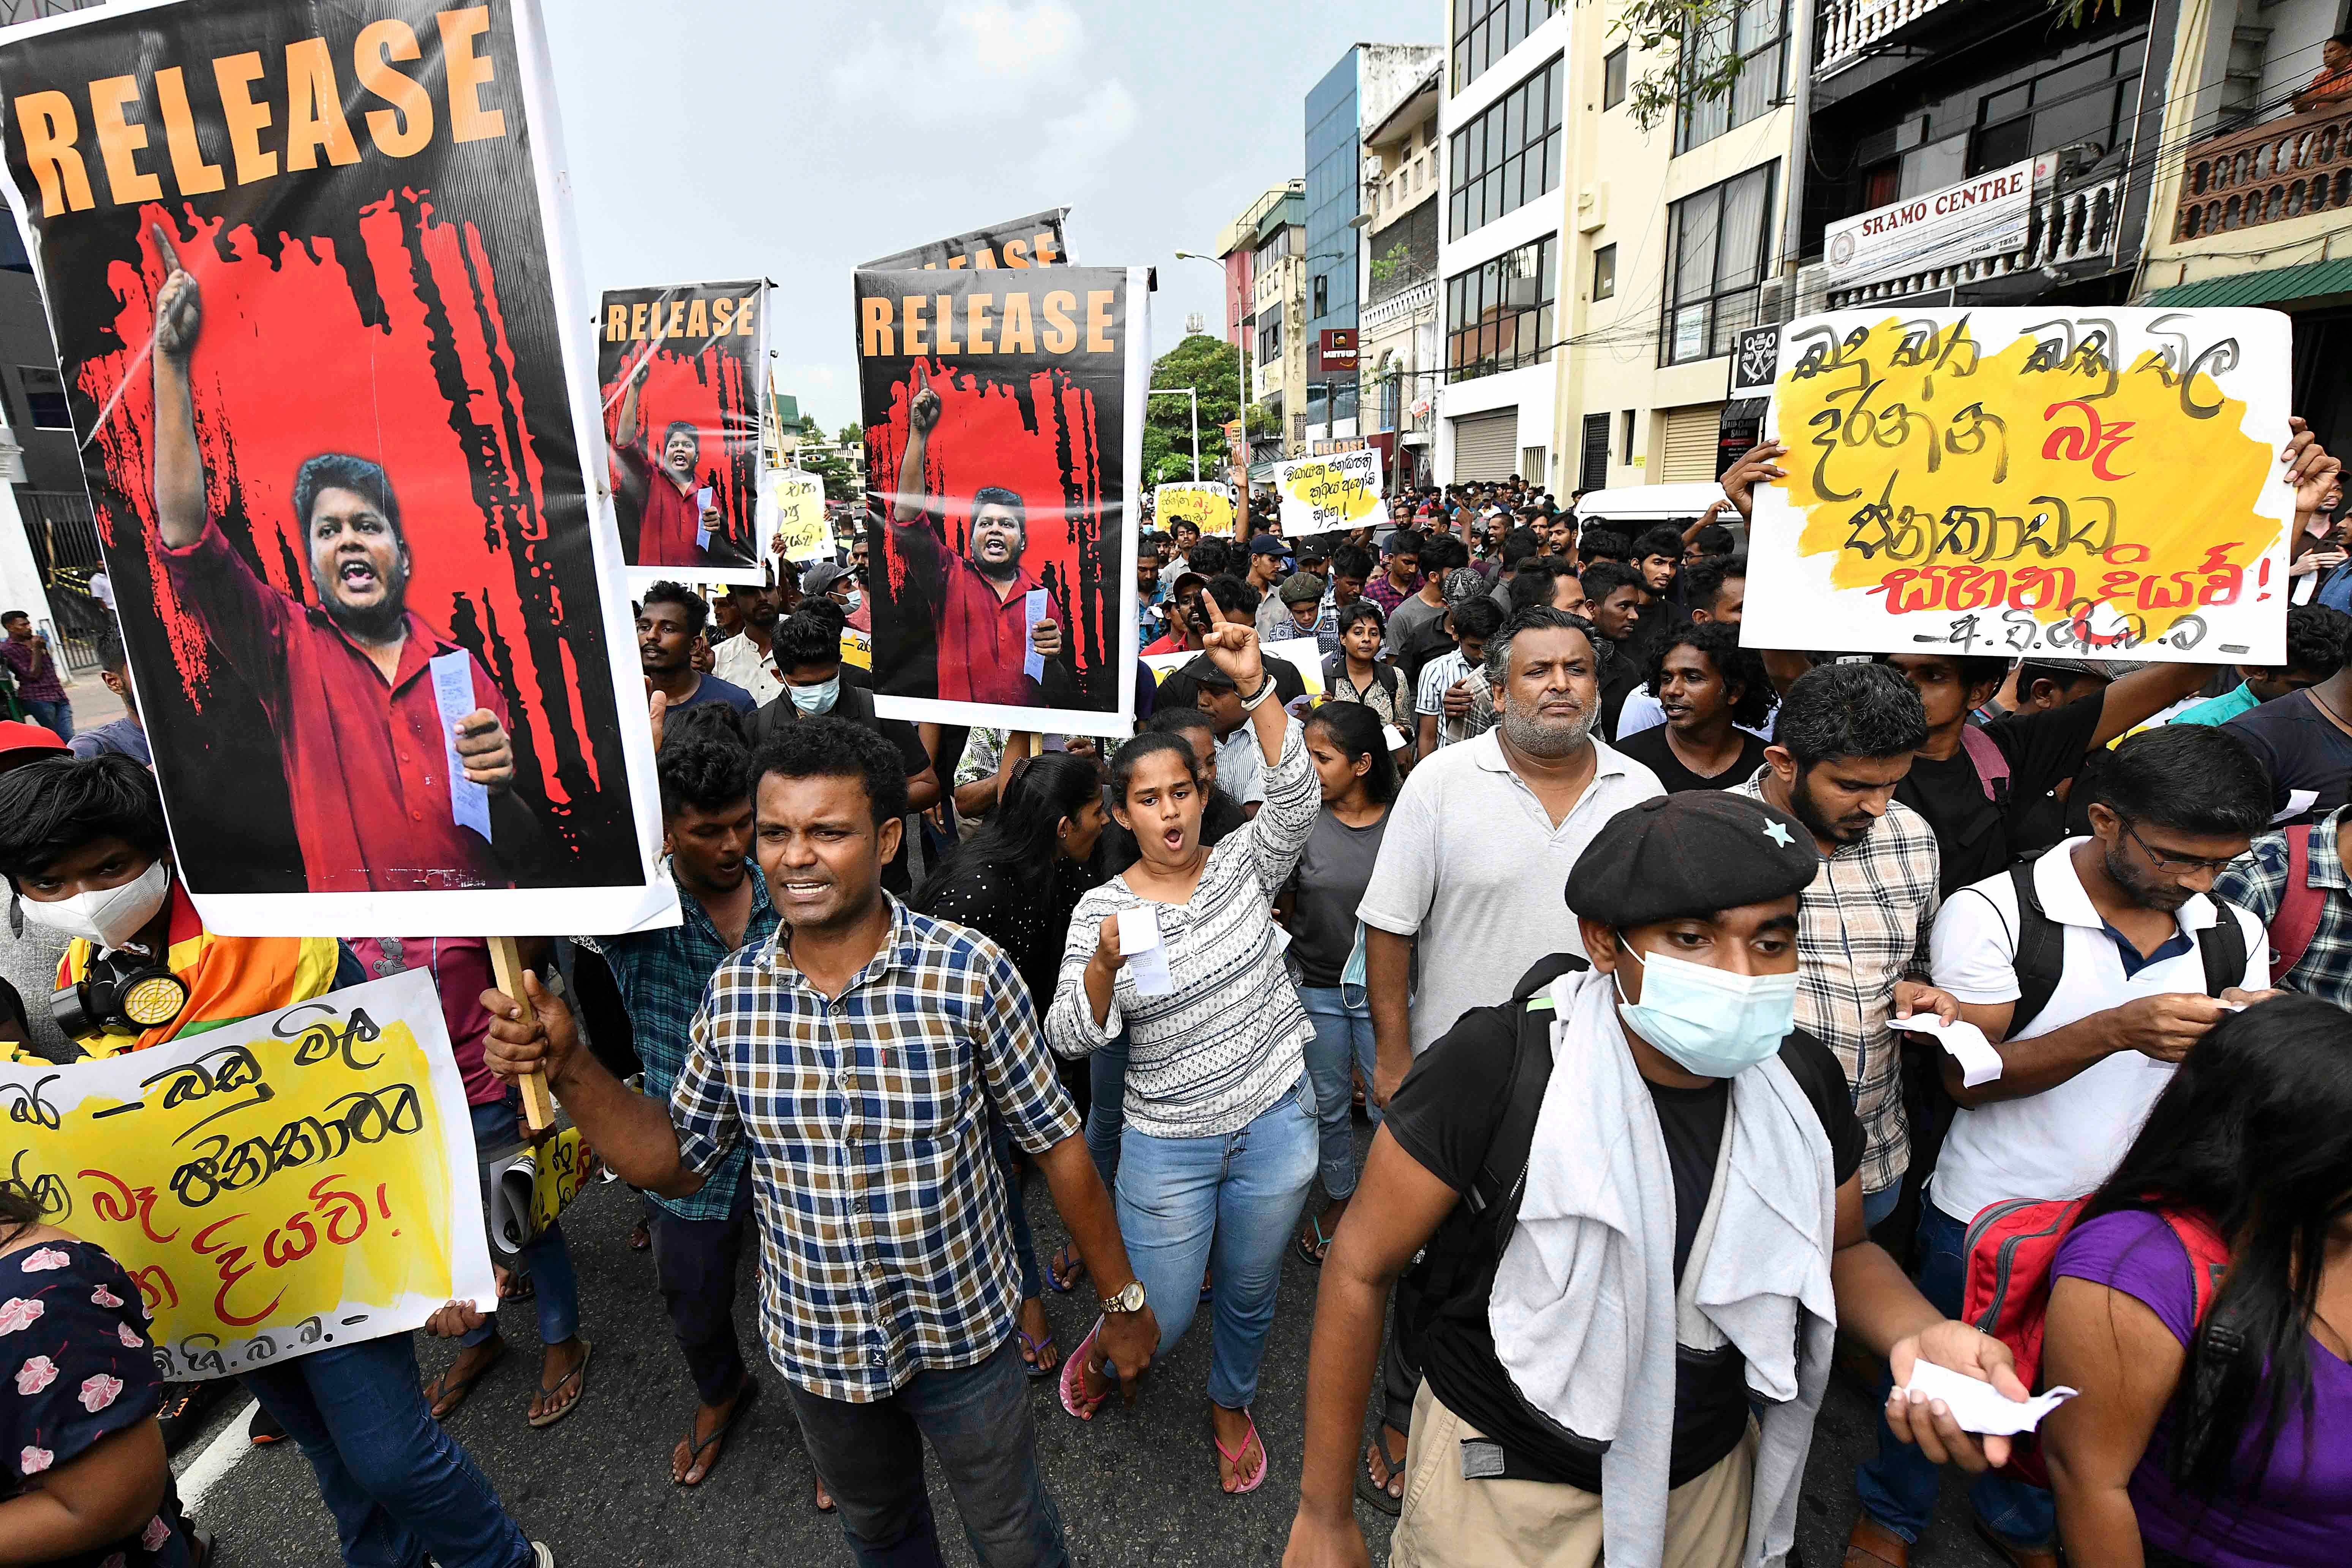 Protesters in Colombo call for the release of student activists detained under Sri Lanka’s counterterrorism legislation, August 30, 2022.